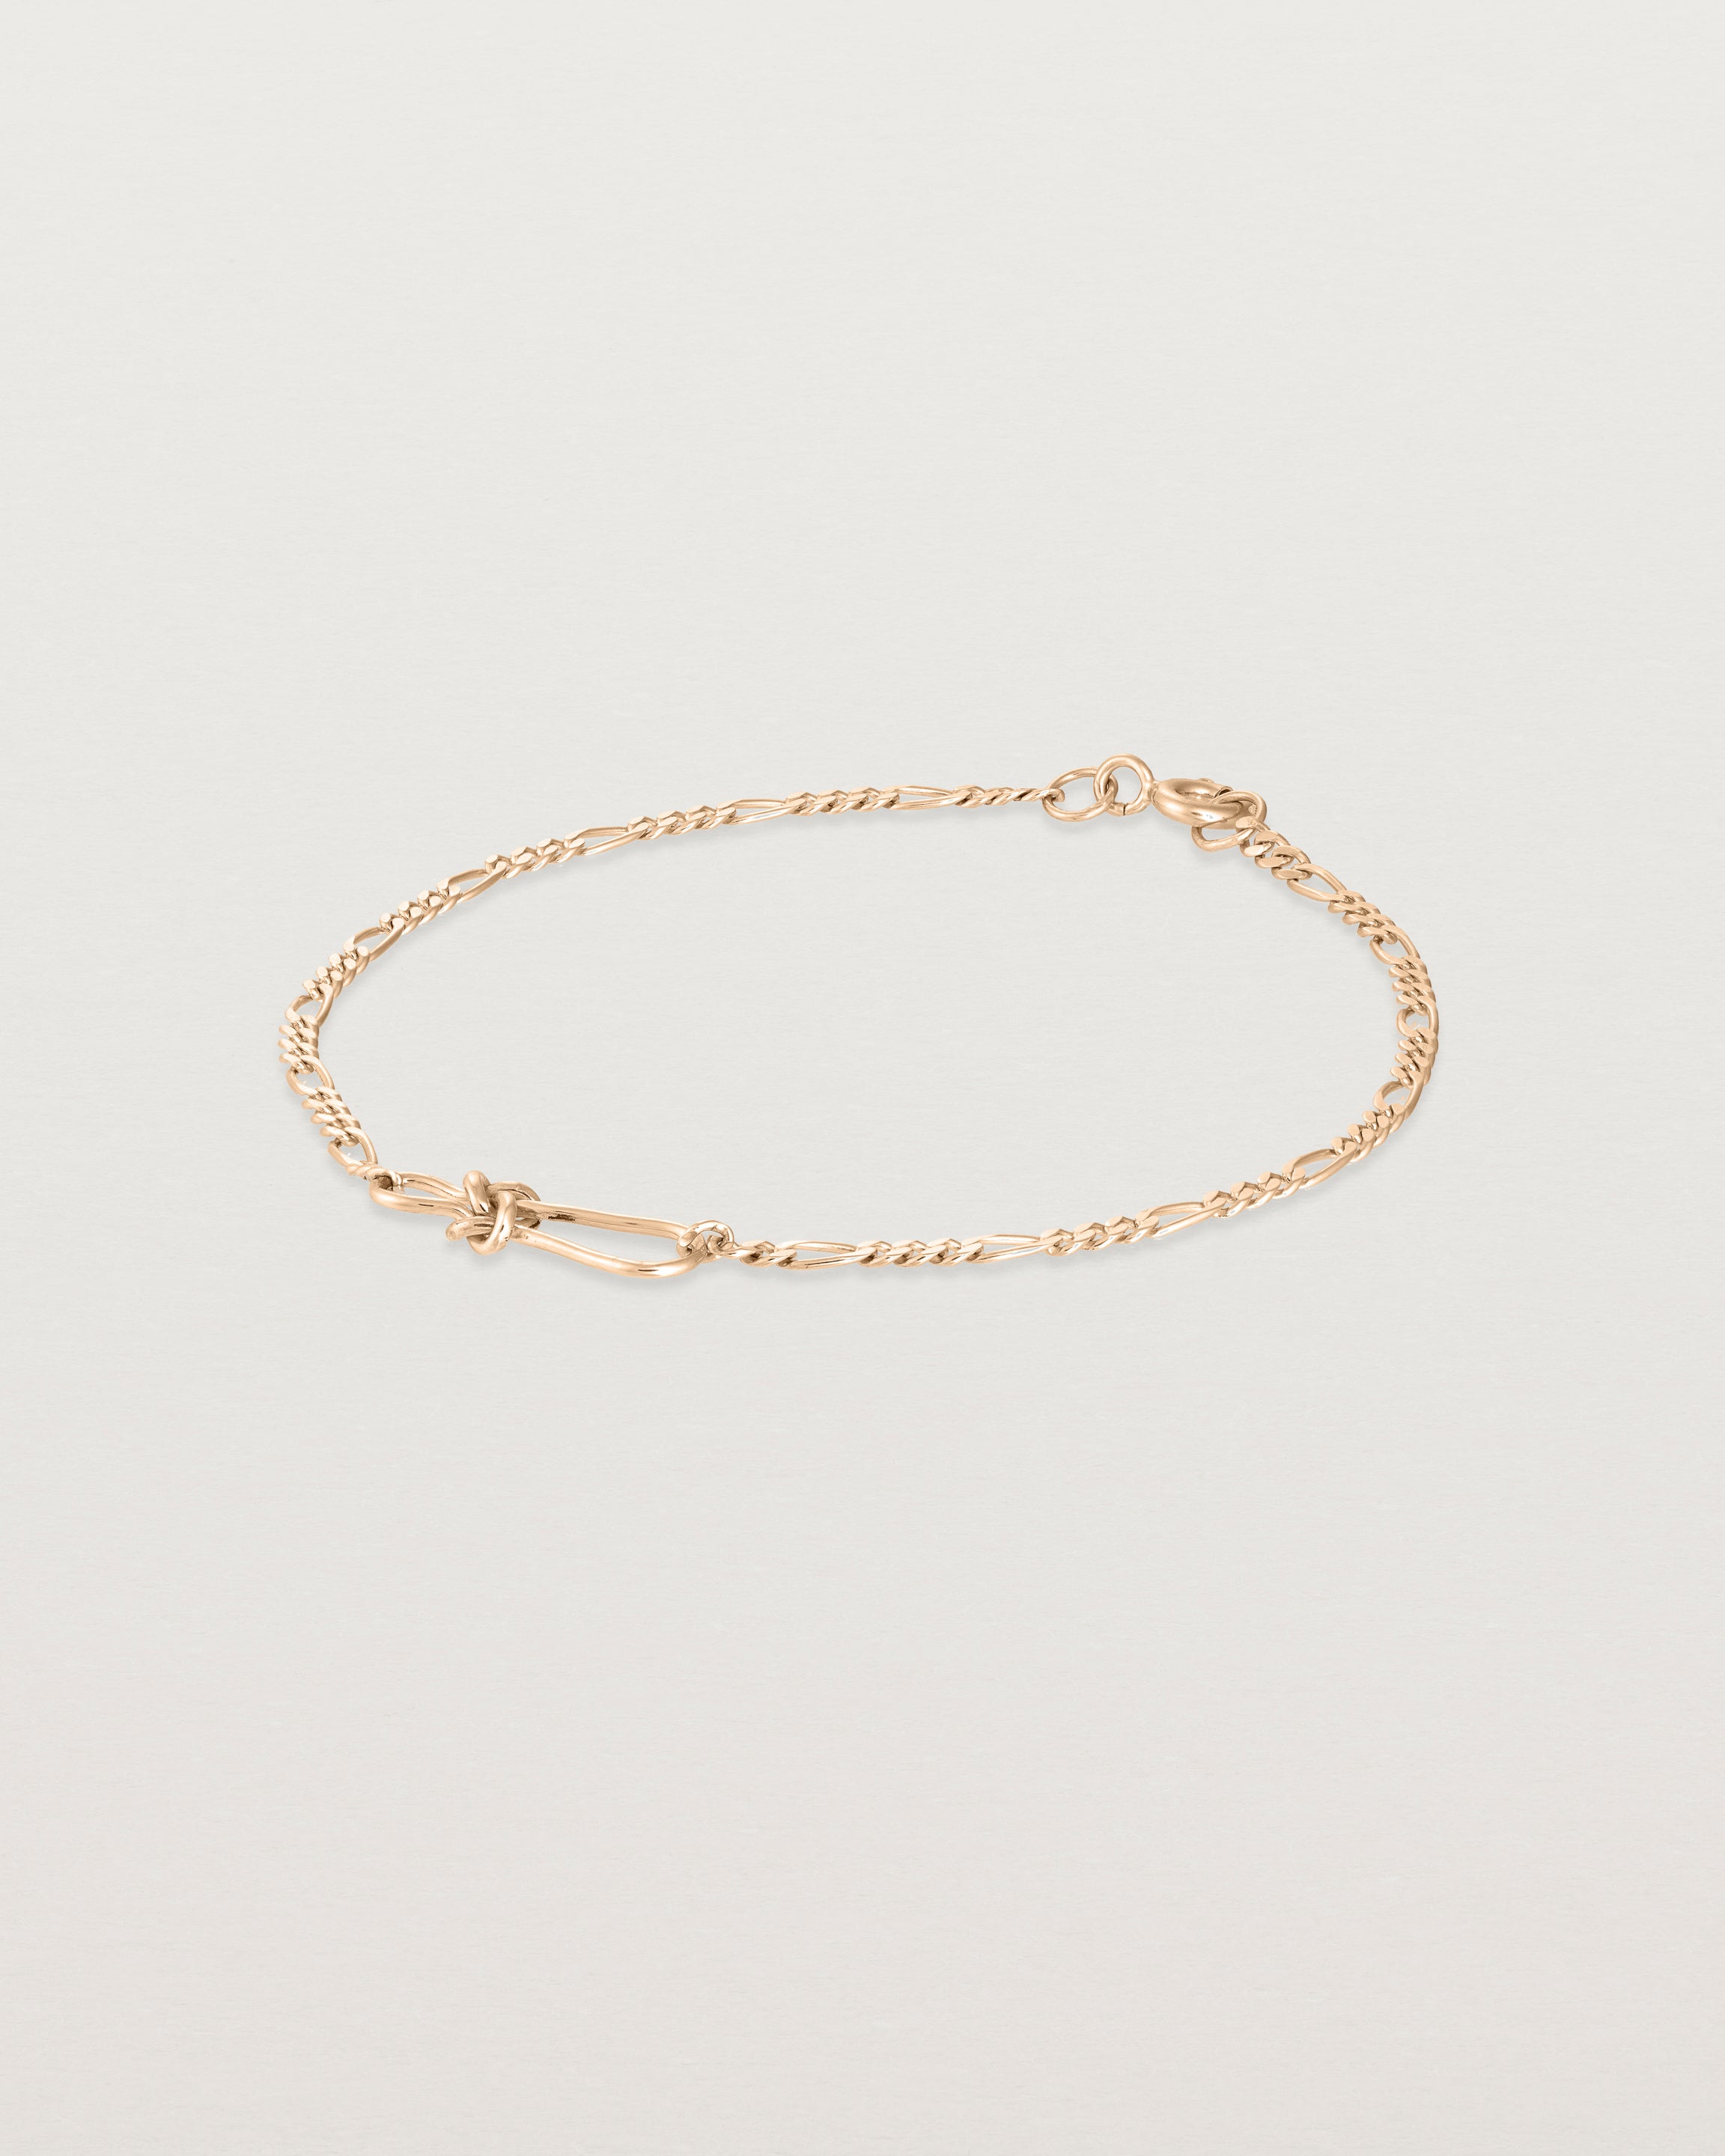 Angled view of the Anam Bracelet in rose gold.